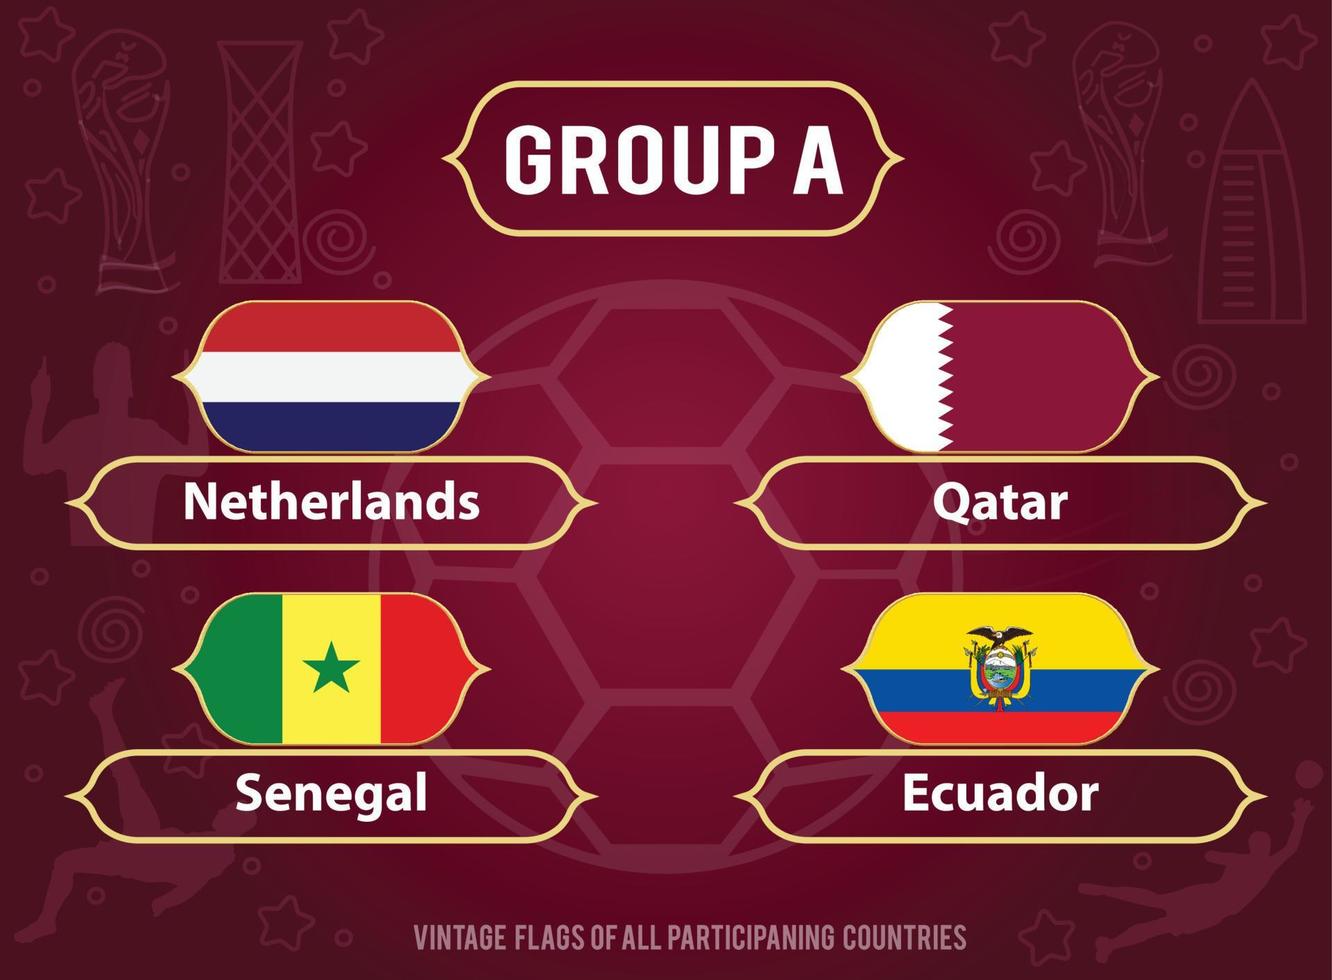 Vintage Flags of all participants of Group A, World Cup vector